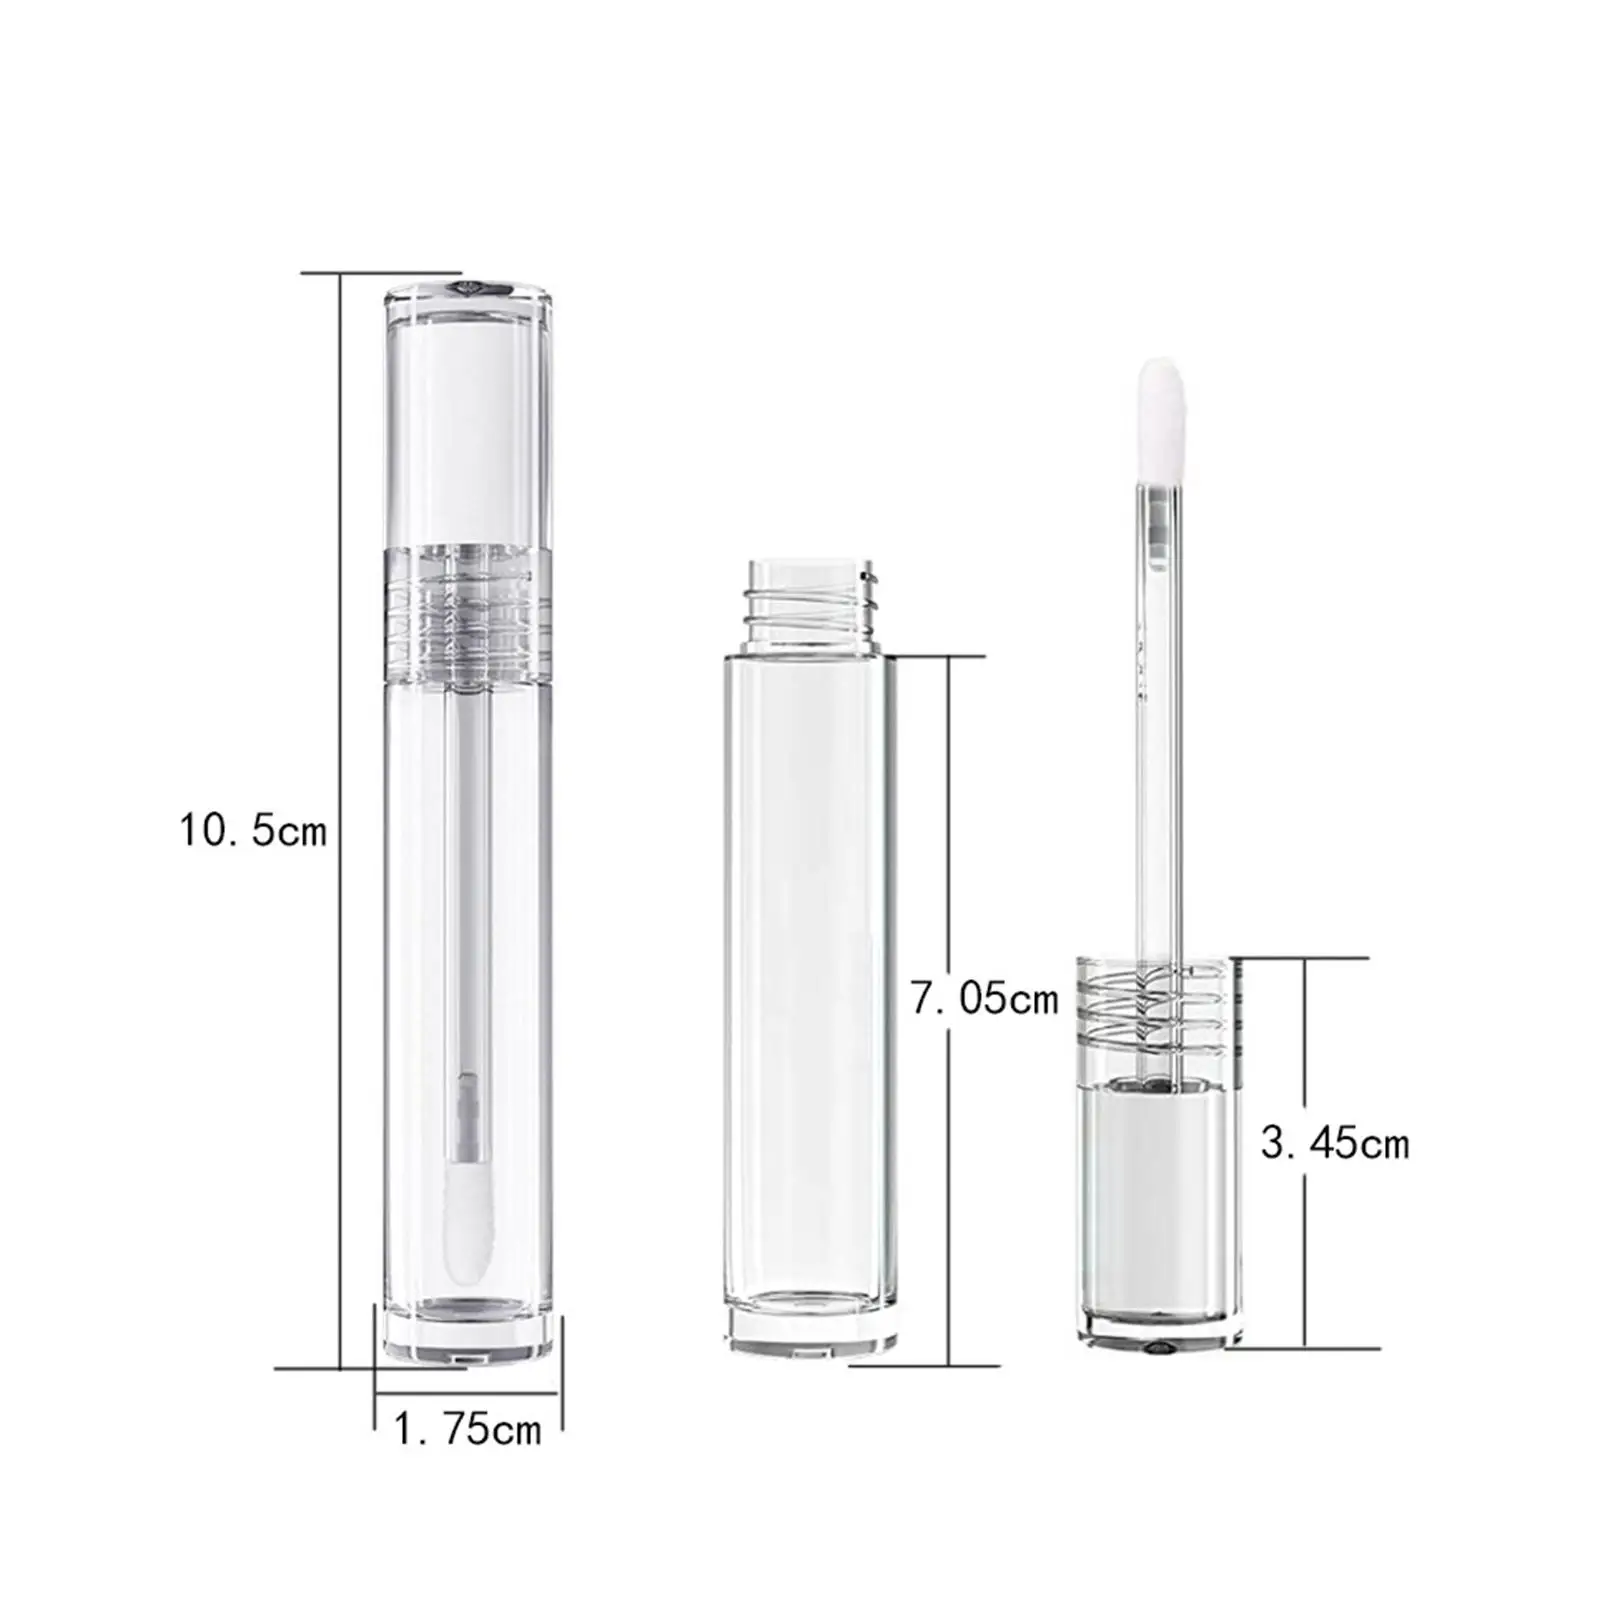 10 Pieces Lip Gloss Tubes Containers Empty Refillable Cosmetic Bottles Samples Portable Sample Packaging Clear for Women Girls